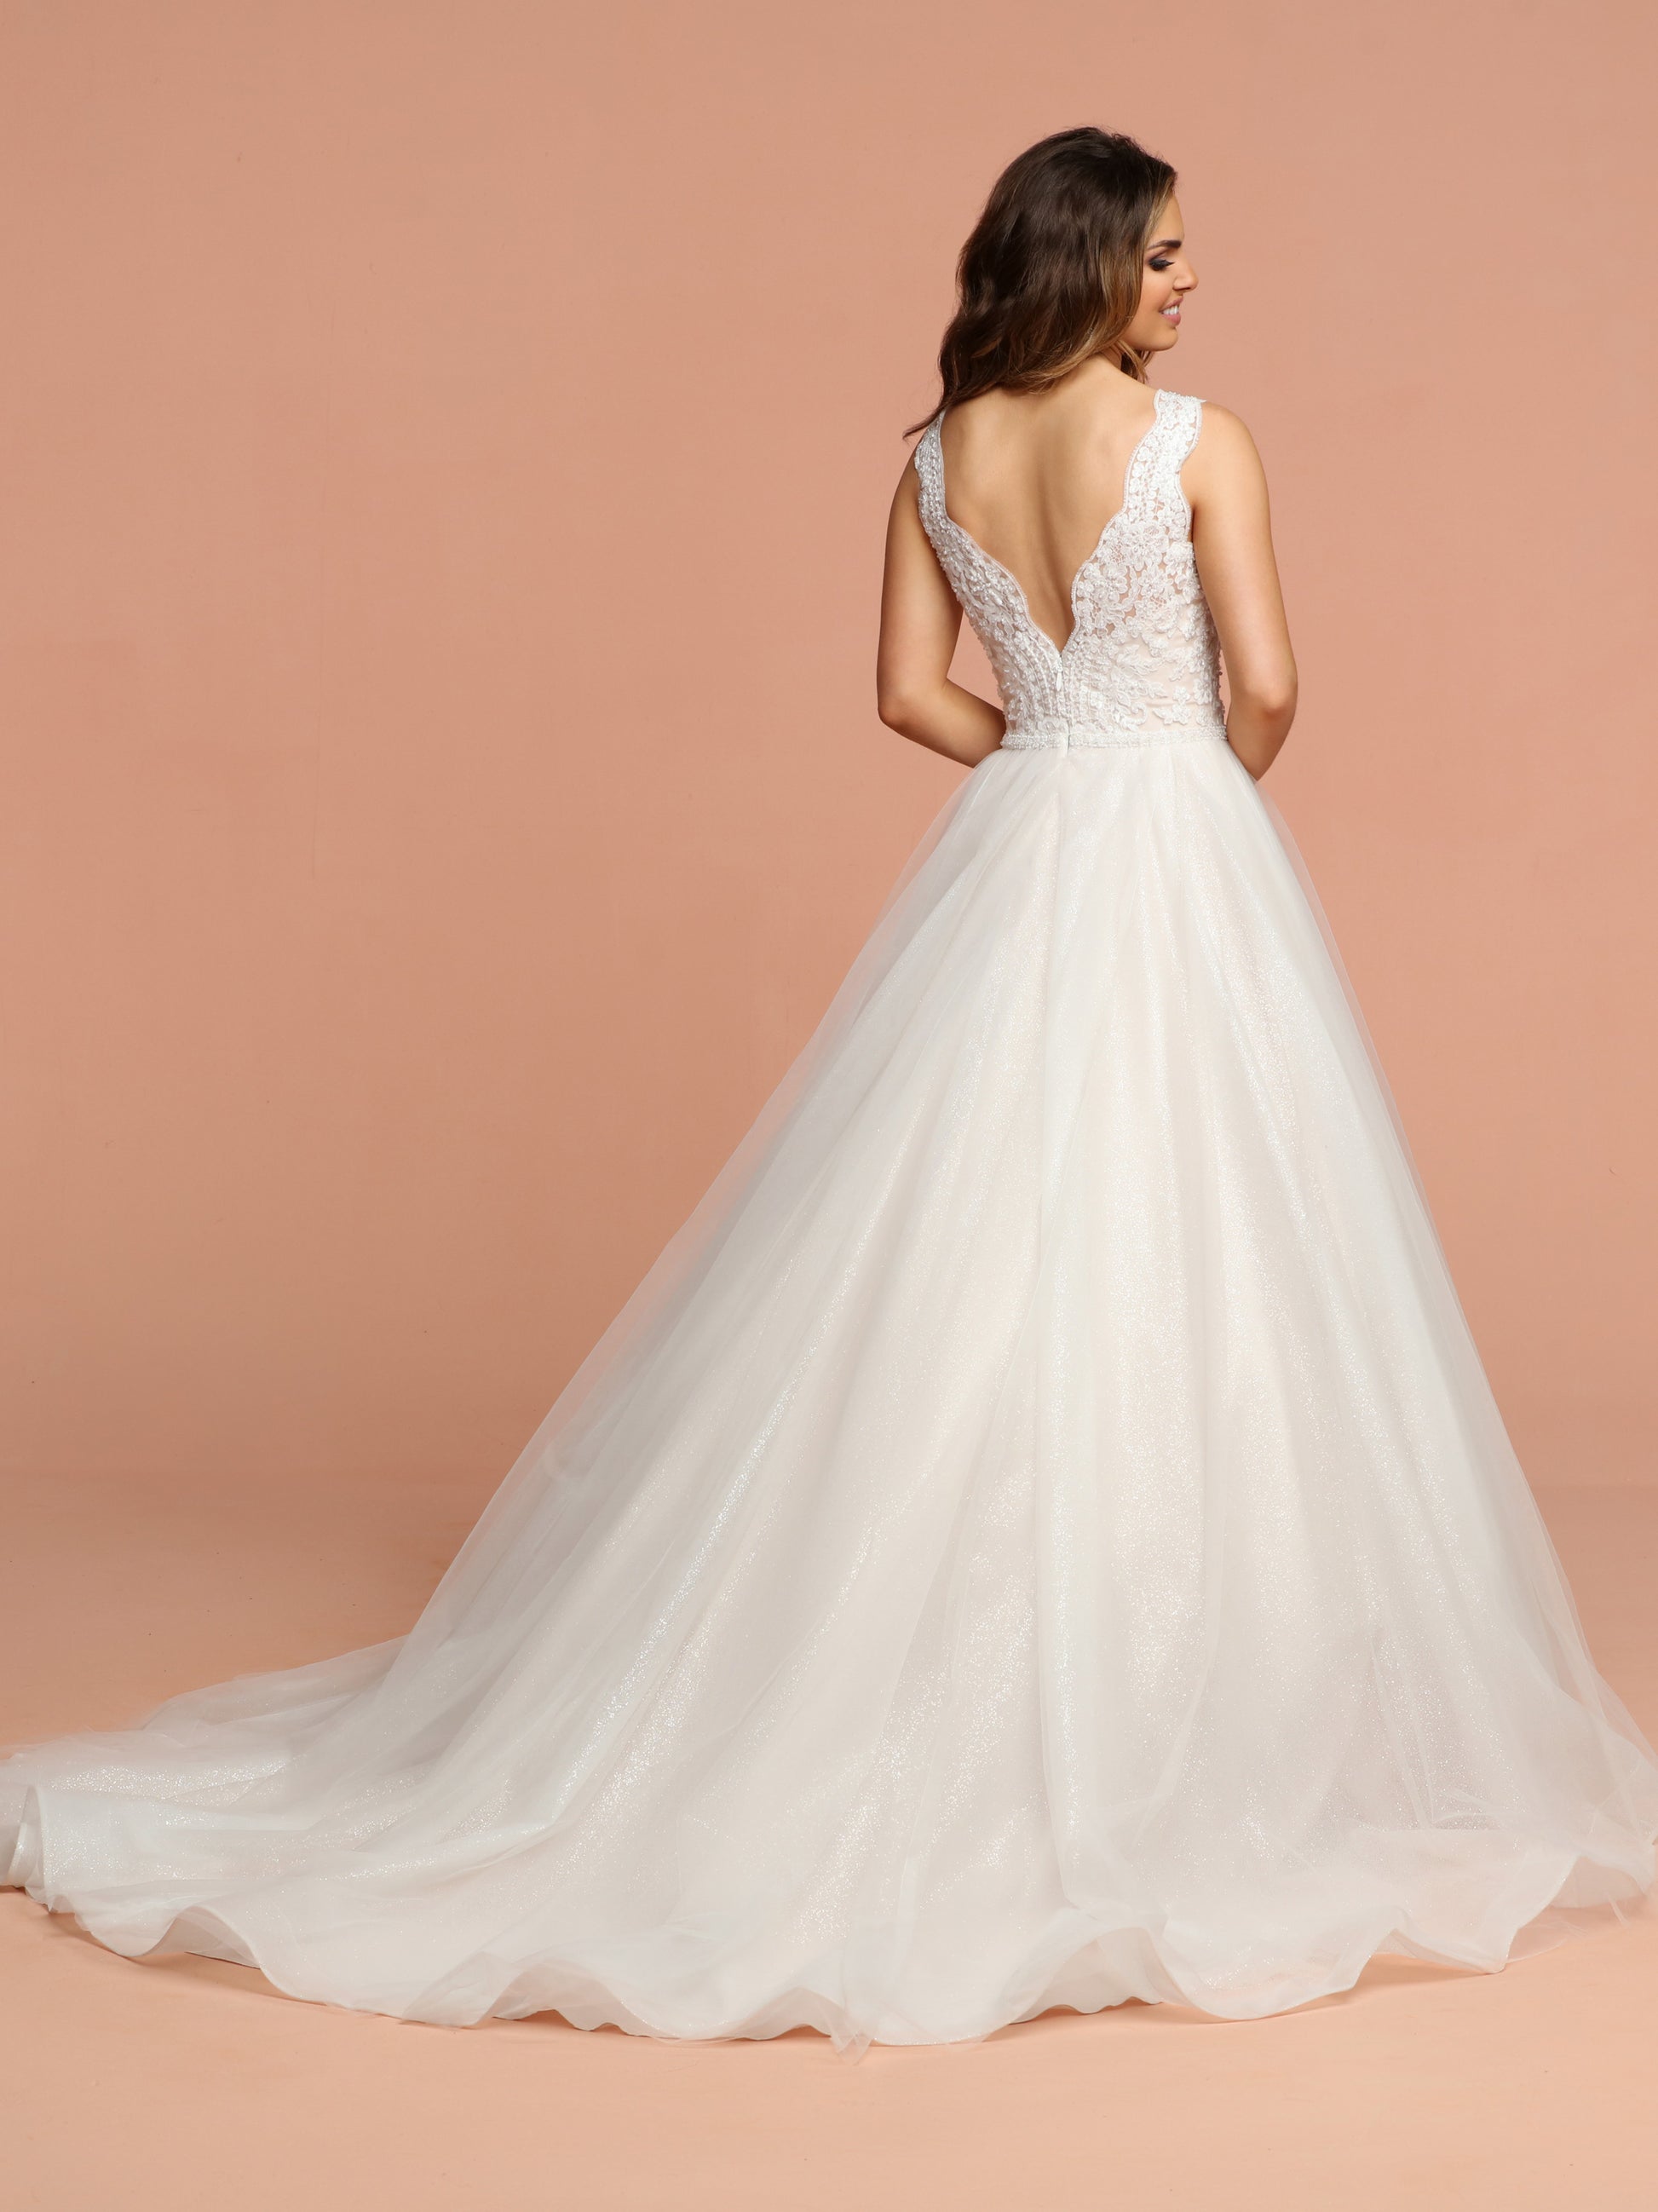 Davinci Bridal 50589 is a Gorgeous Glitter Shimmer Tulle Ballgown Wedding Dress. Featuring a beautiful eyelash lace embellished bodice with a V neckline and open V back. The full tulle skirt shimmers with a full train.  Available for 1-2 Week Delivery!!!  Available Sizes: 2,4,6,8,10,12,14,16,18,20  Available Colors: Ivory/Blush, Ivory/Ivory